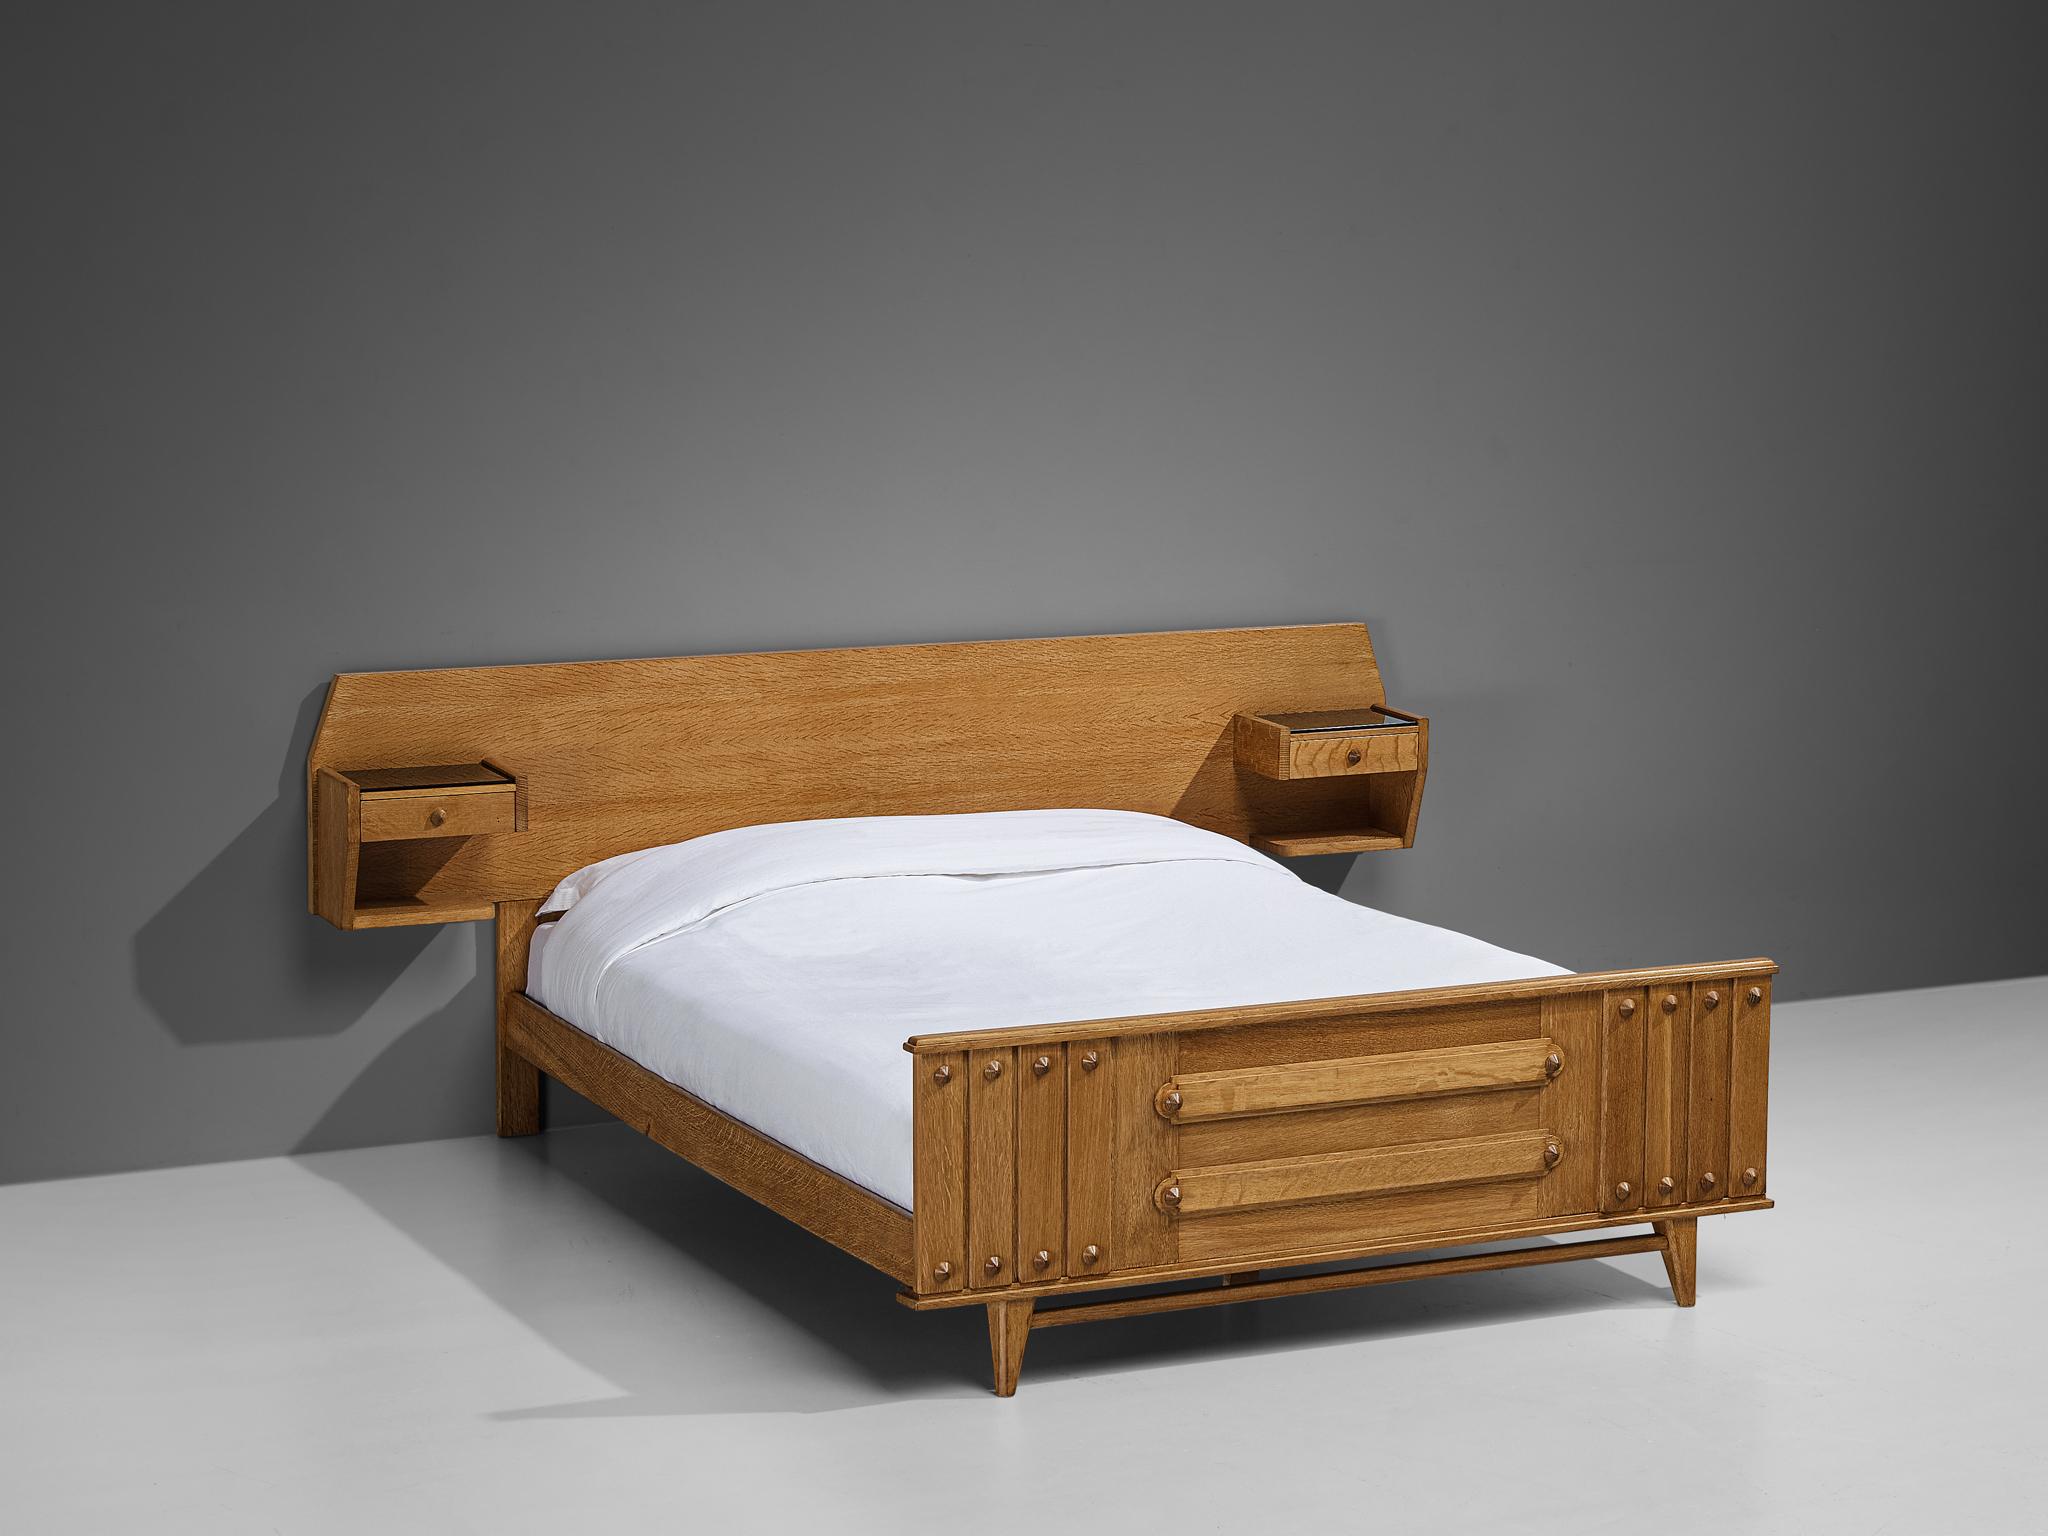 European double bed, oak, black colored glass, France, 1960s

This remarkable double bed hails from France, showcasing its excellence in composition, material use, and intricate detailing. It stands as a testament to exceptional craftsmanship,